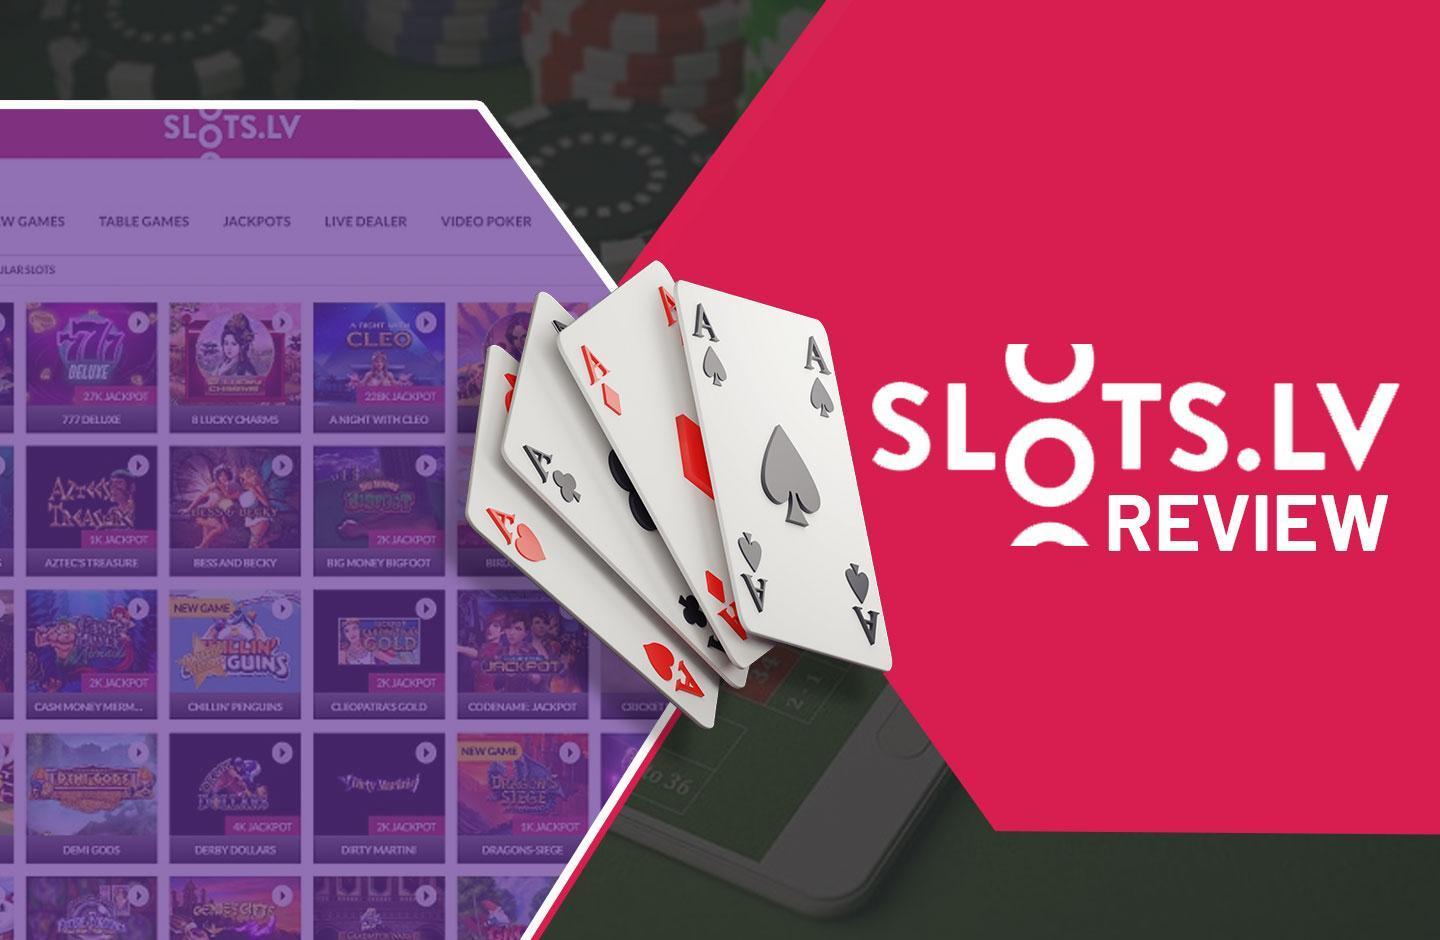 Slots.Lv Review: $7,500 Bonus, Casino Games, Payment Options, and More